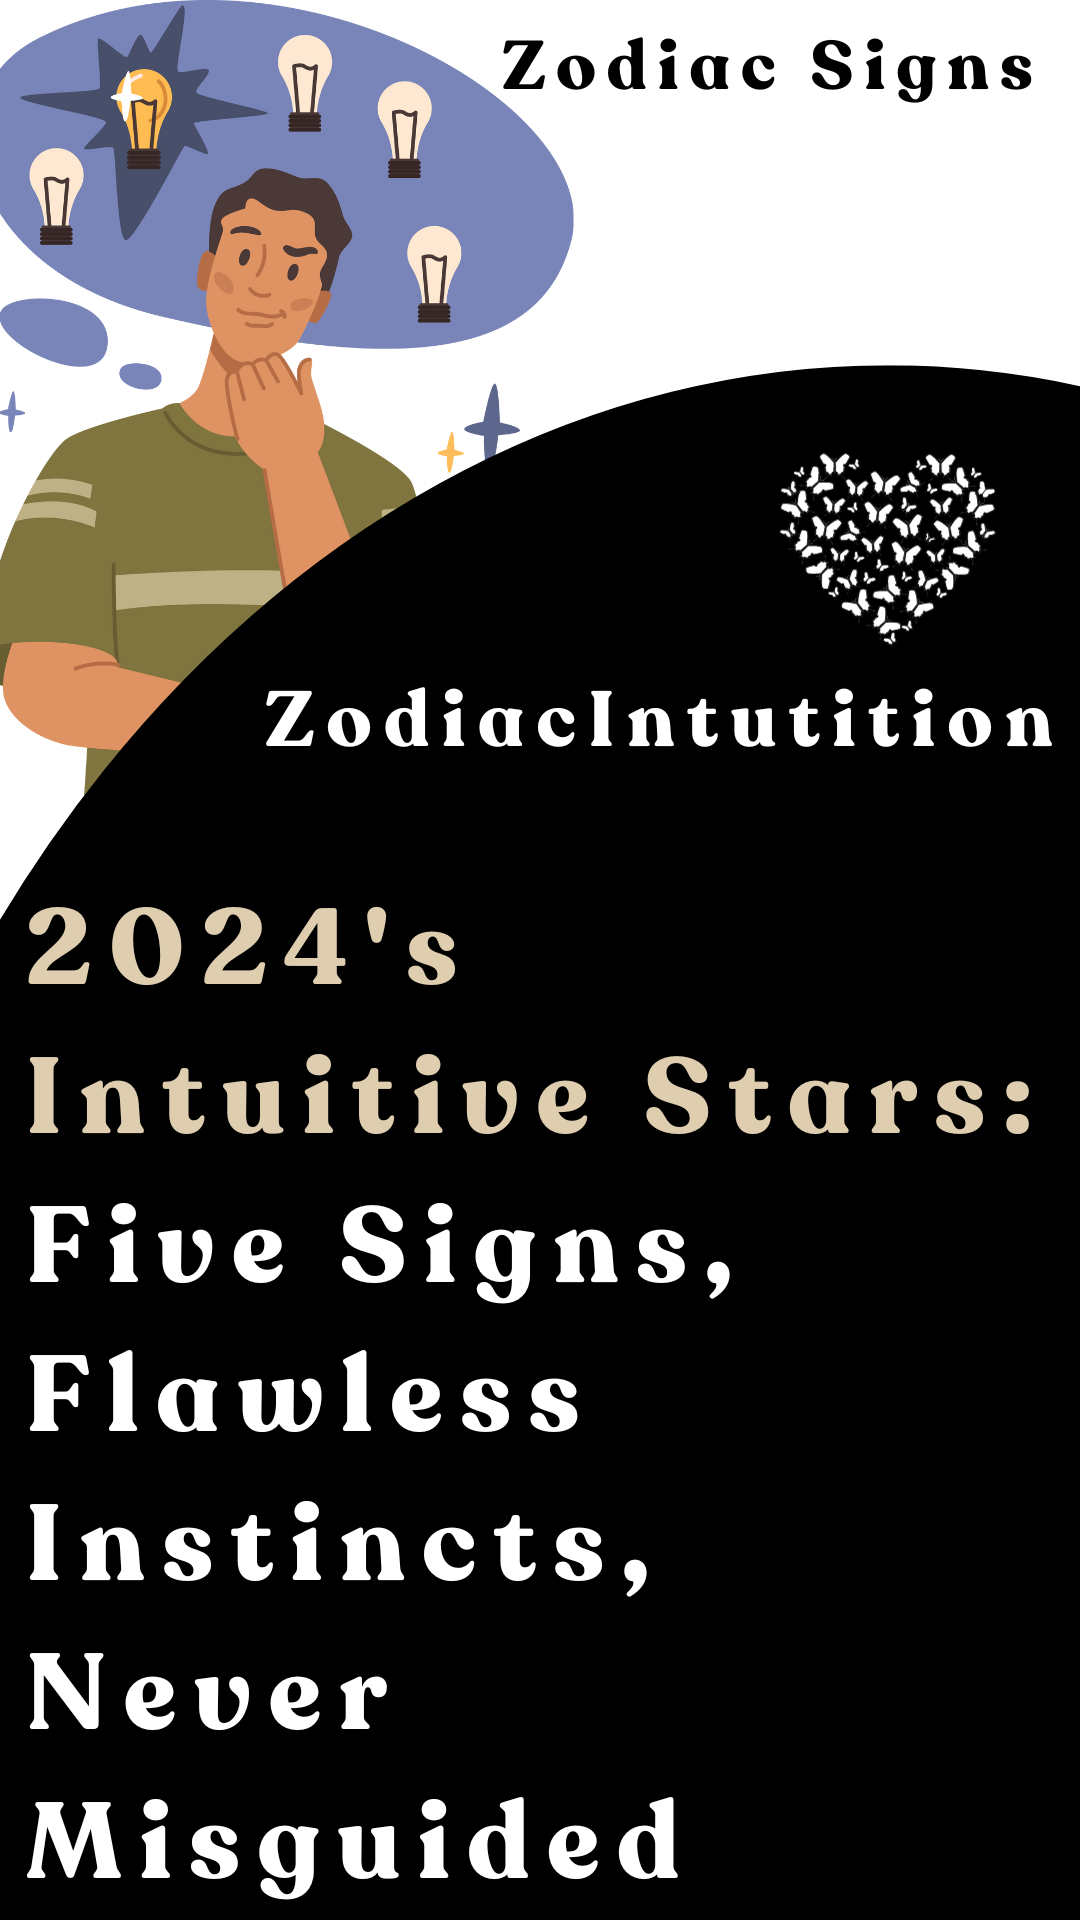 2024's Intuitive Stars: Five Signs, Flawless Instincts, Never Misguided